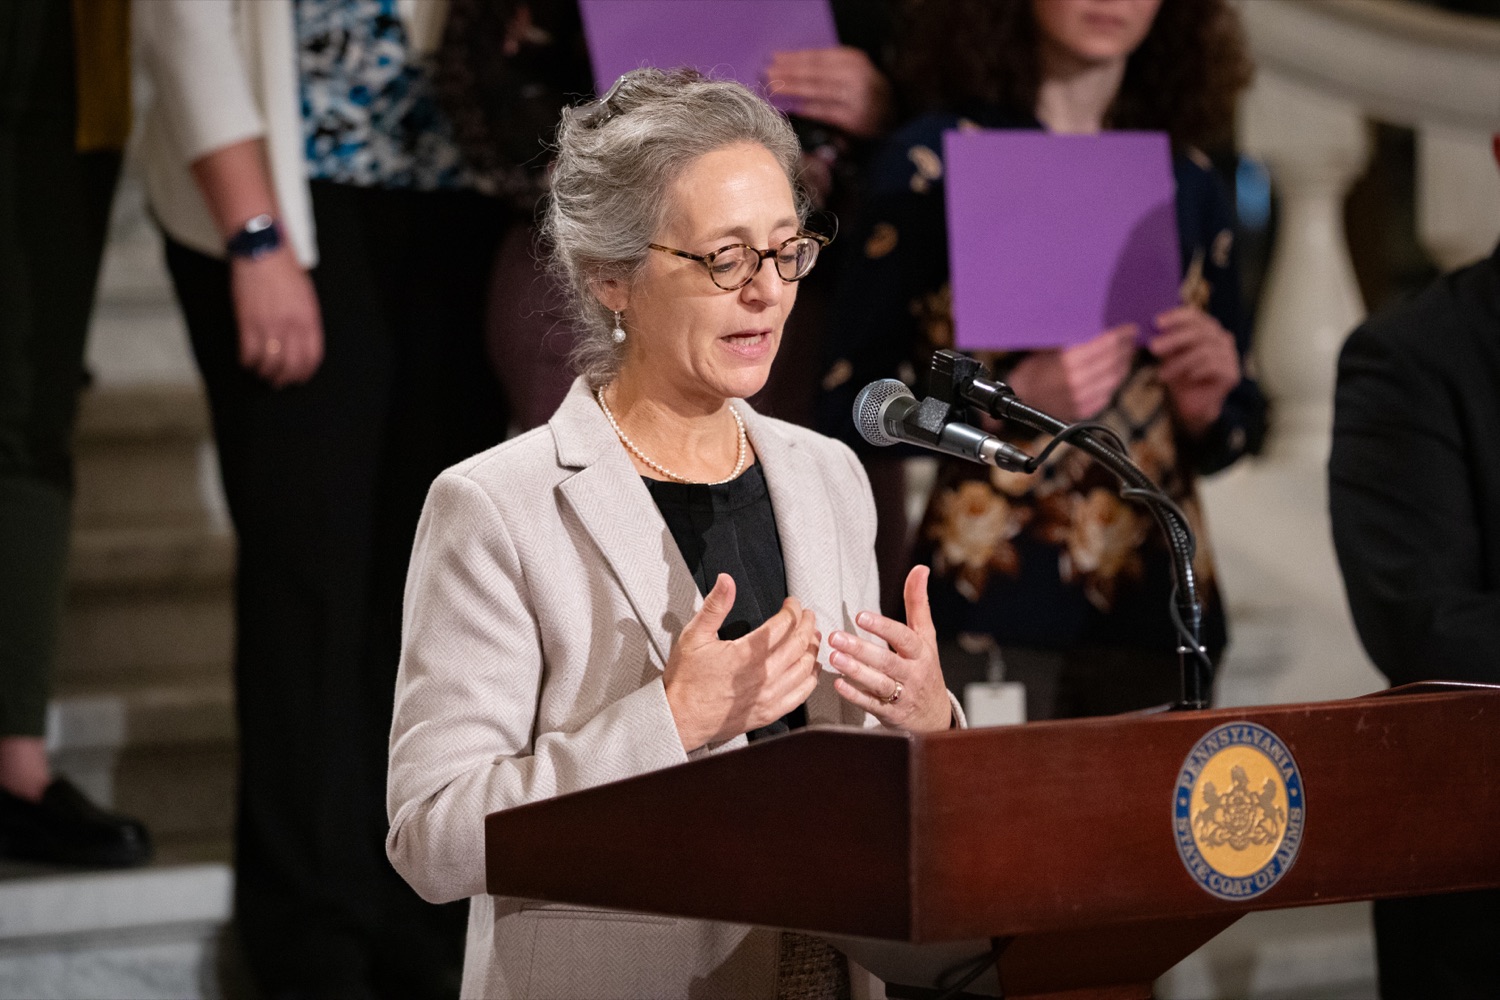 Department of Health Acting Secretary, Dr. Debra Bogen, speaks at Pennsylvanias Suicide Prevention Month Press Conference at the State Capital in Harrisburg, PA.<br><a href="https://filesource.amperwave.net/commonwealthofpa/photo/23696_dhs_suicidePrevention-8.jpg" target="_blank">⇣ Download Photo</a>